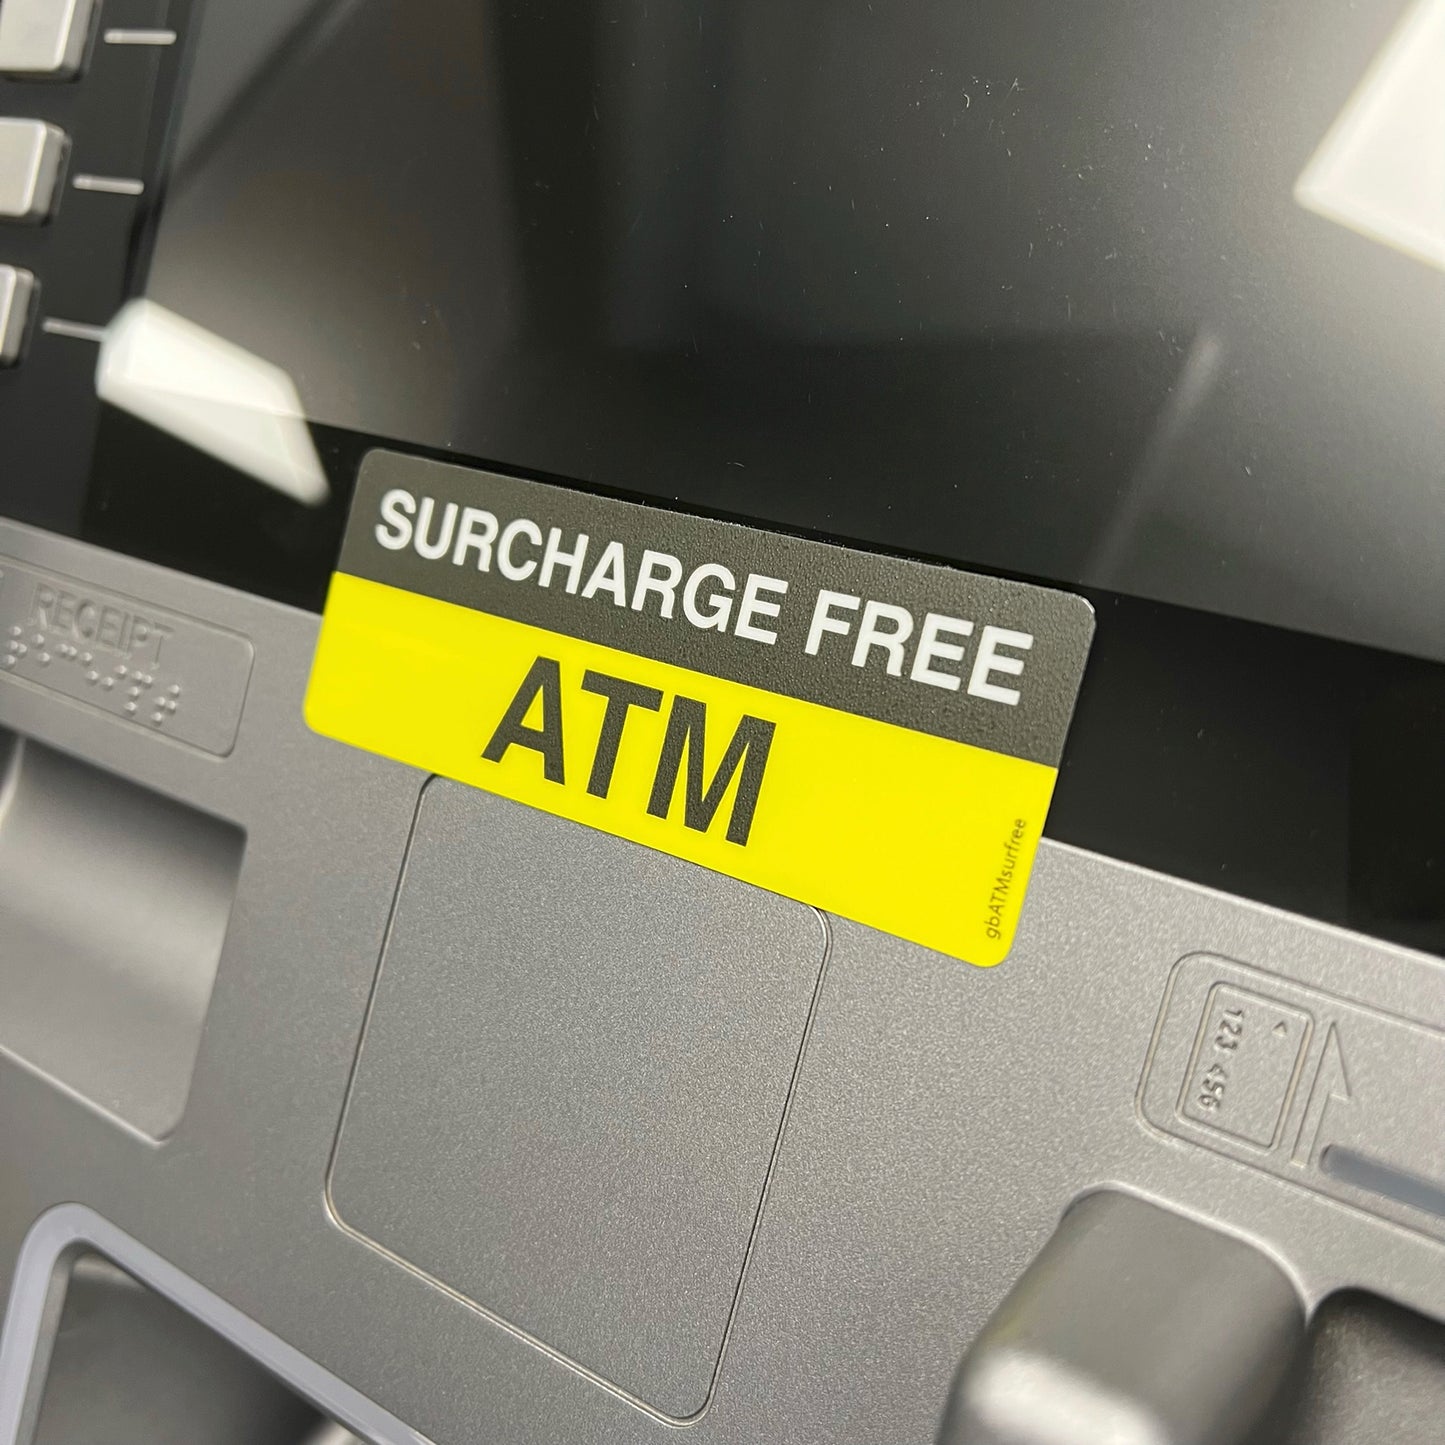 Surcharge Free ATM Decal Image.